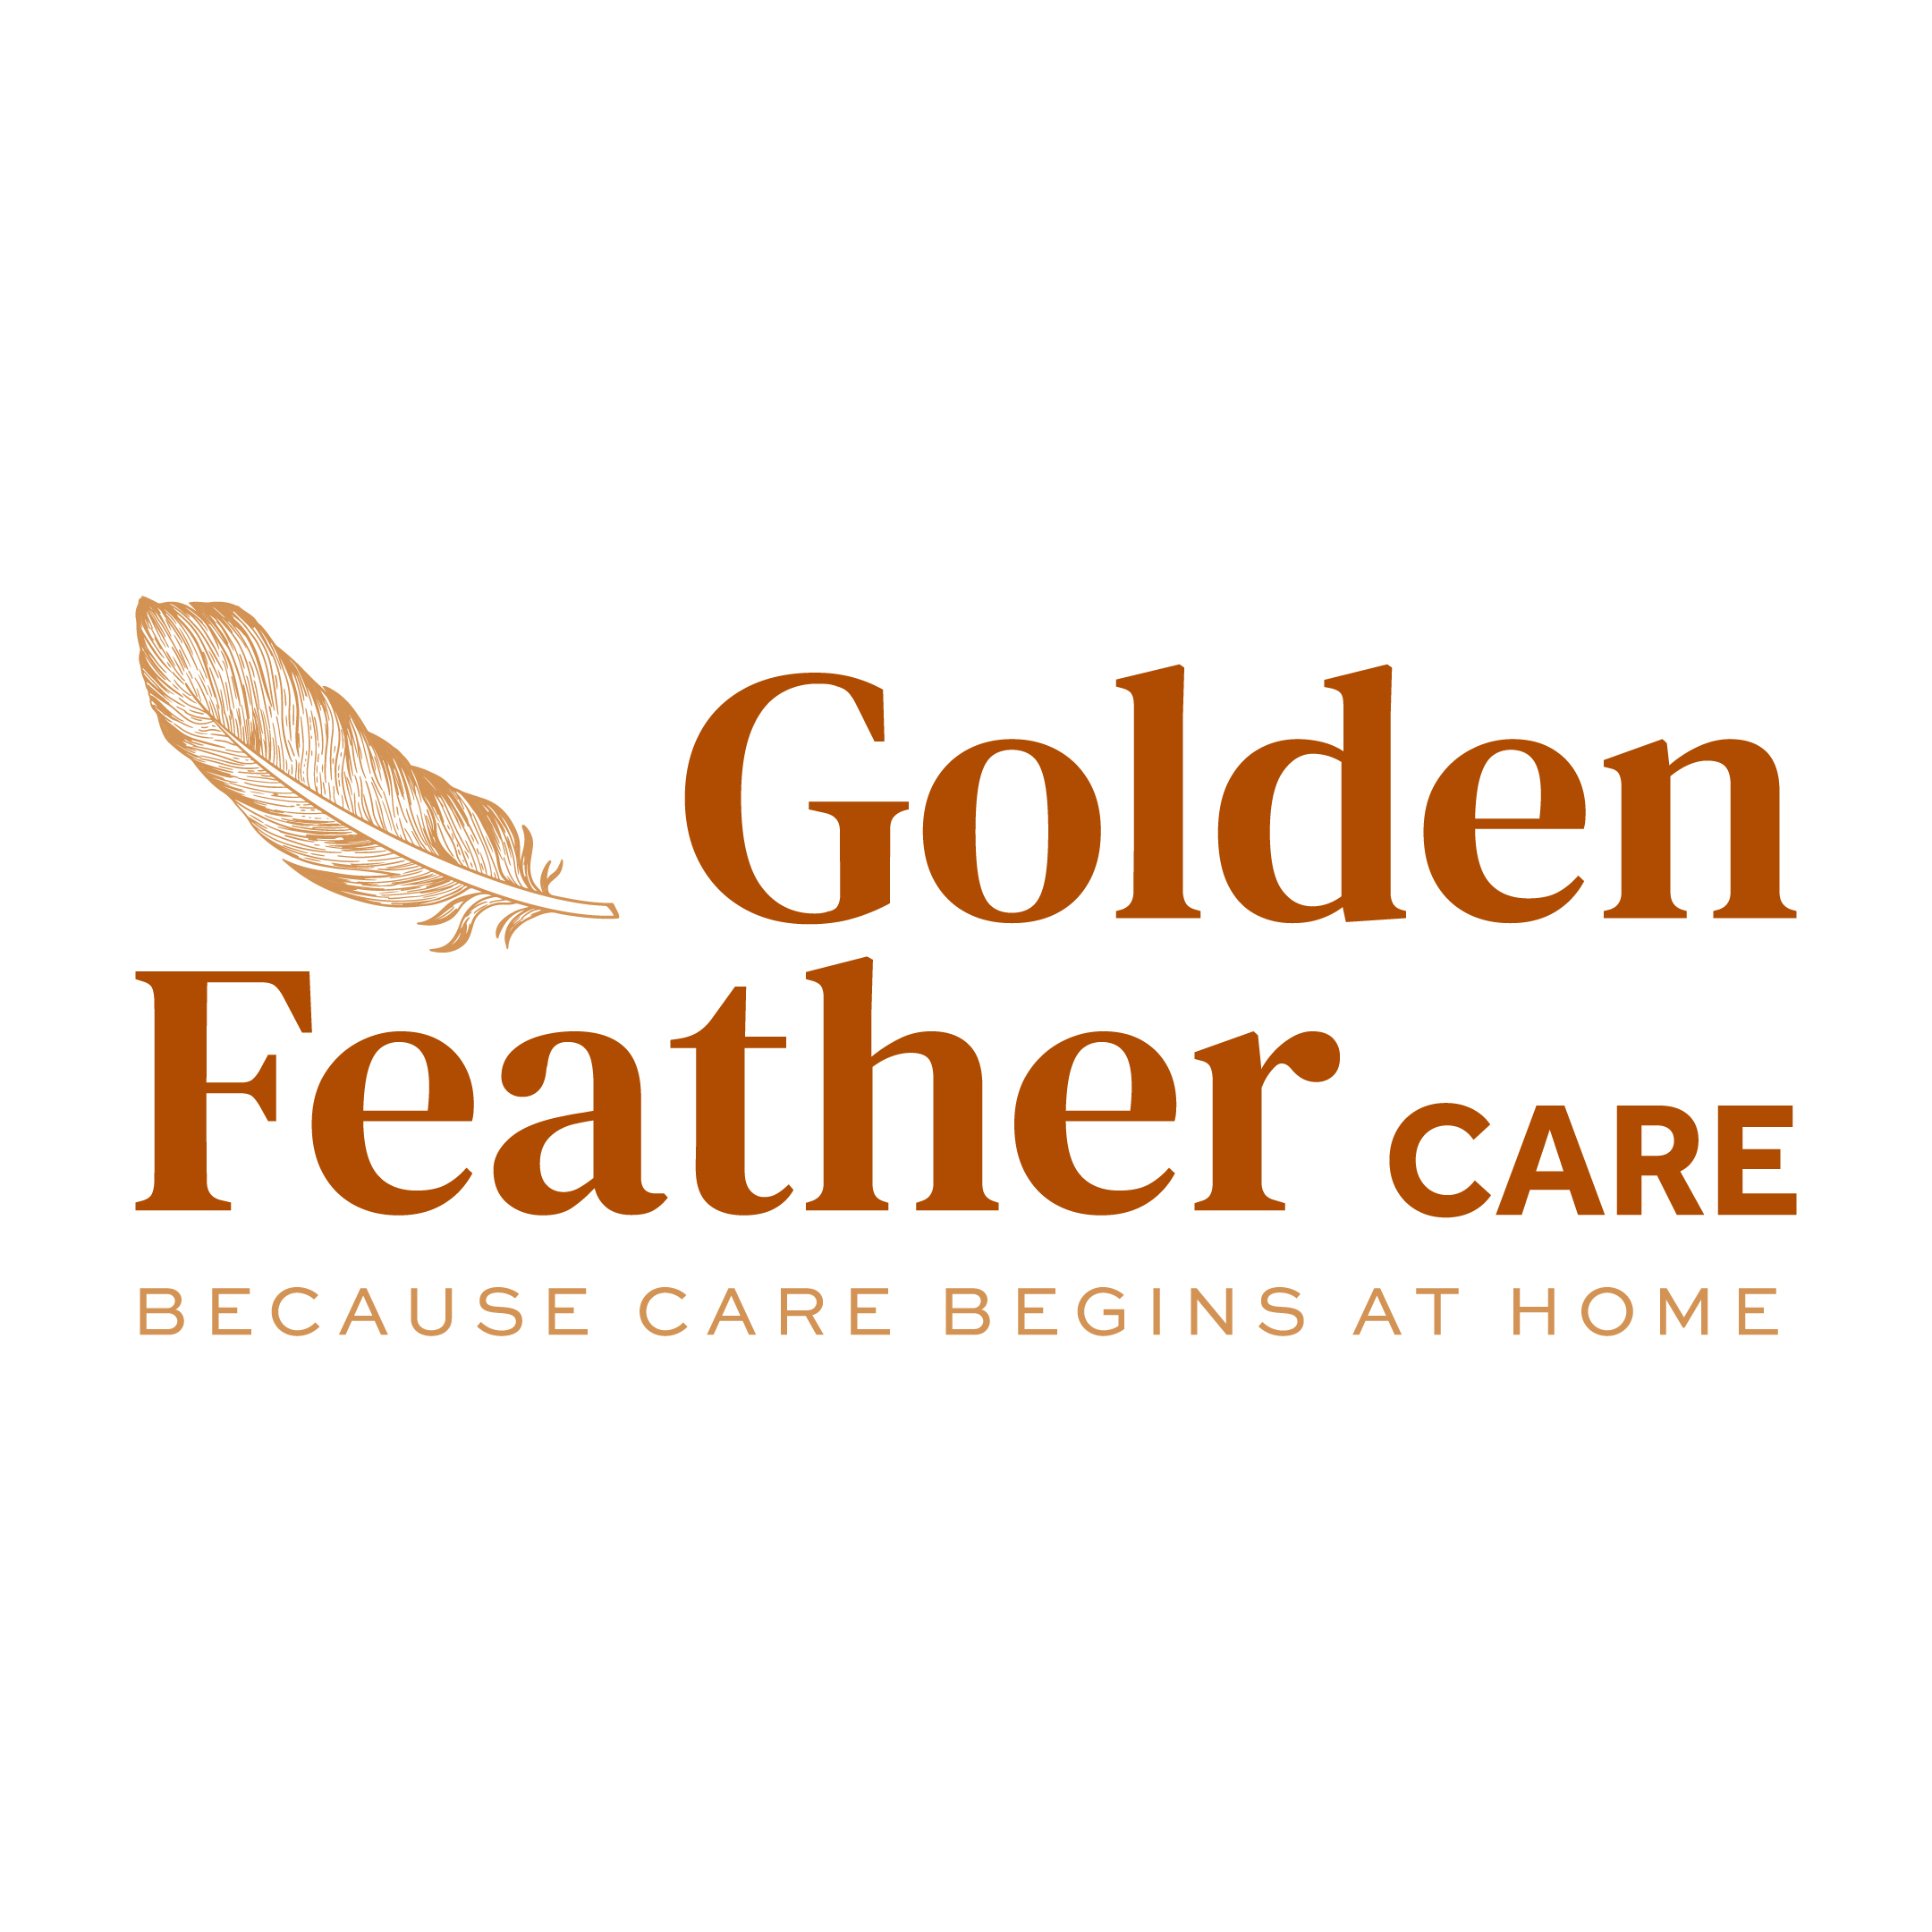 Golden Feather means delicacy and high quality of caring